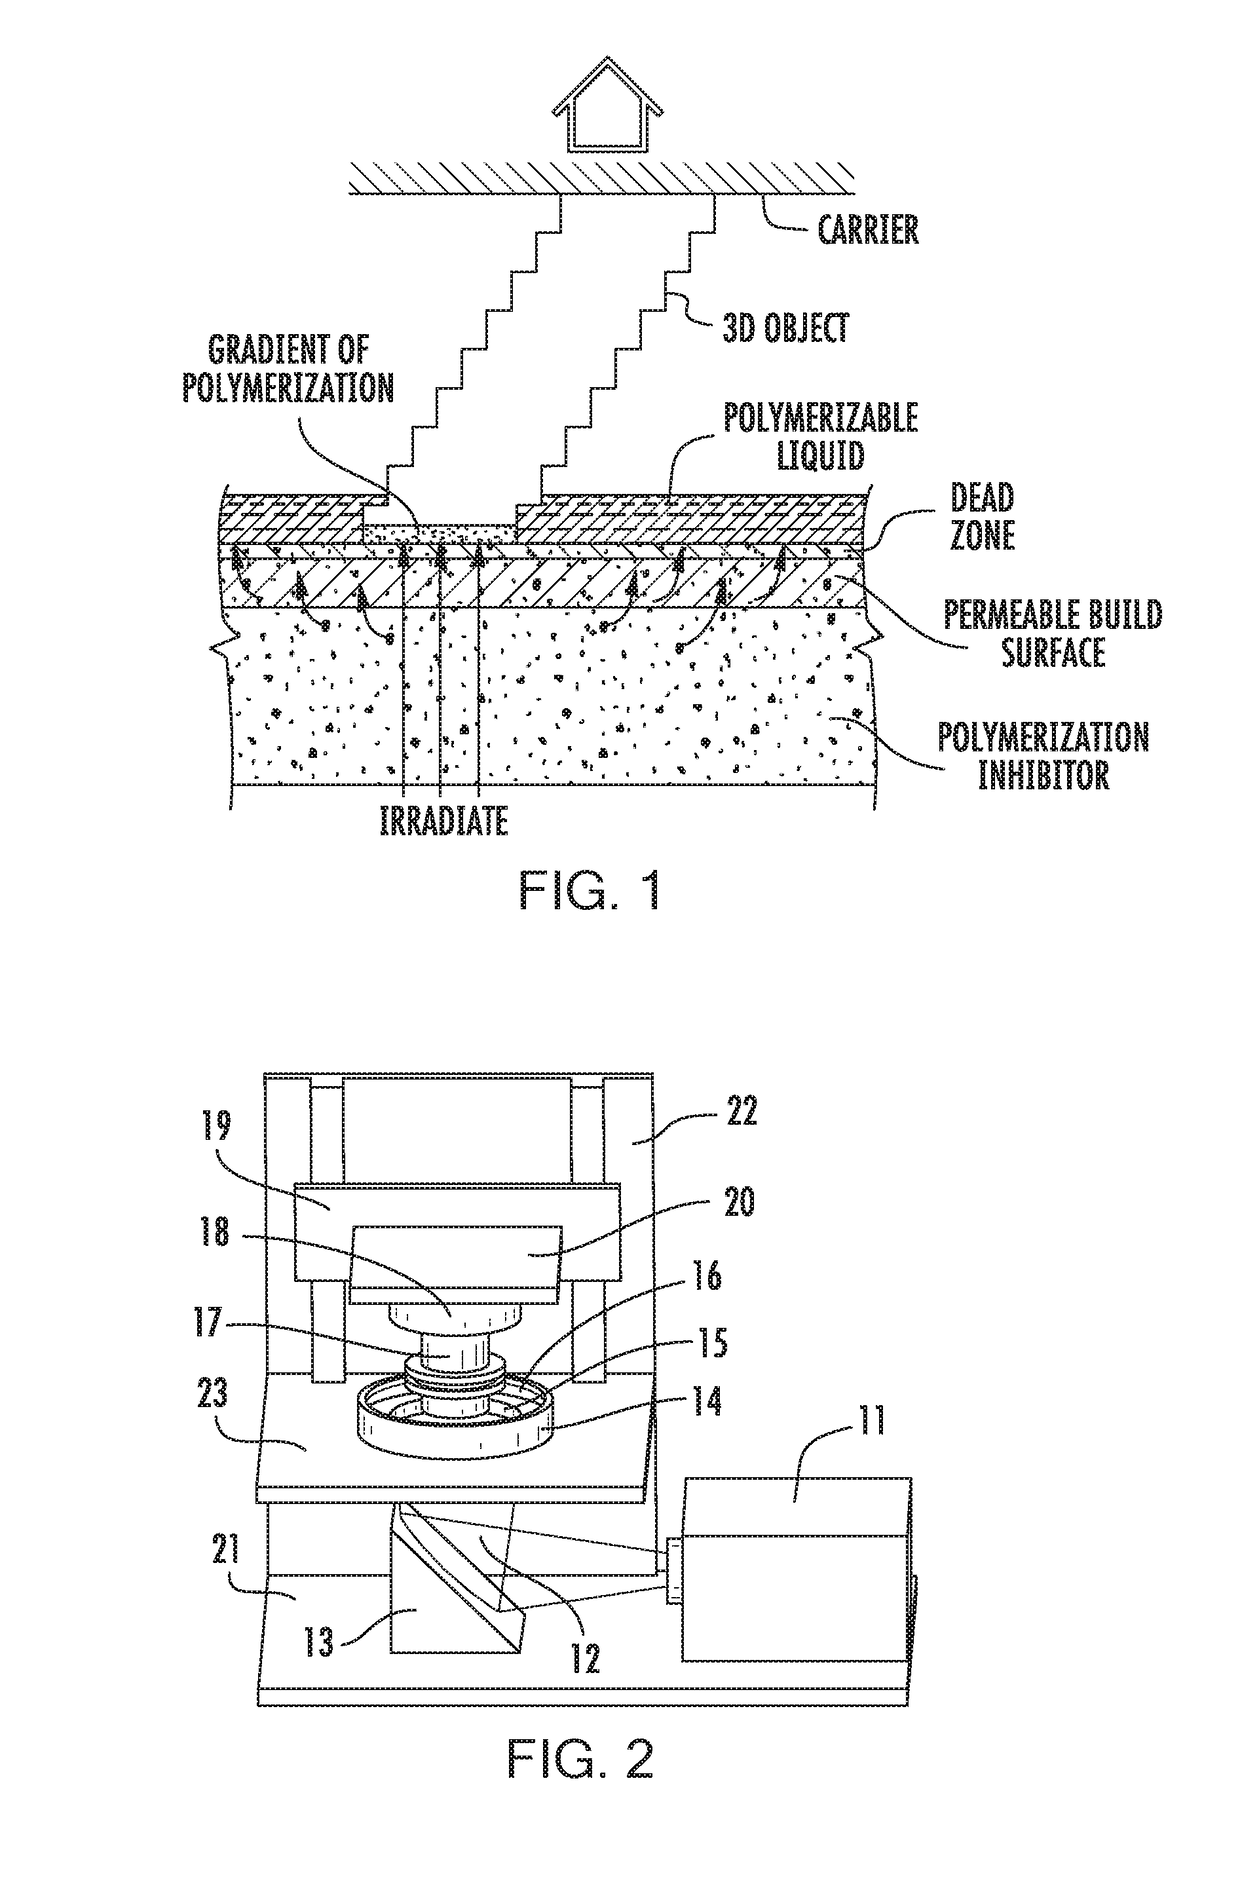 Continuous liquid interface production with sequential patterned exposure